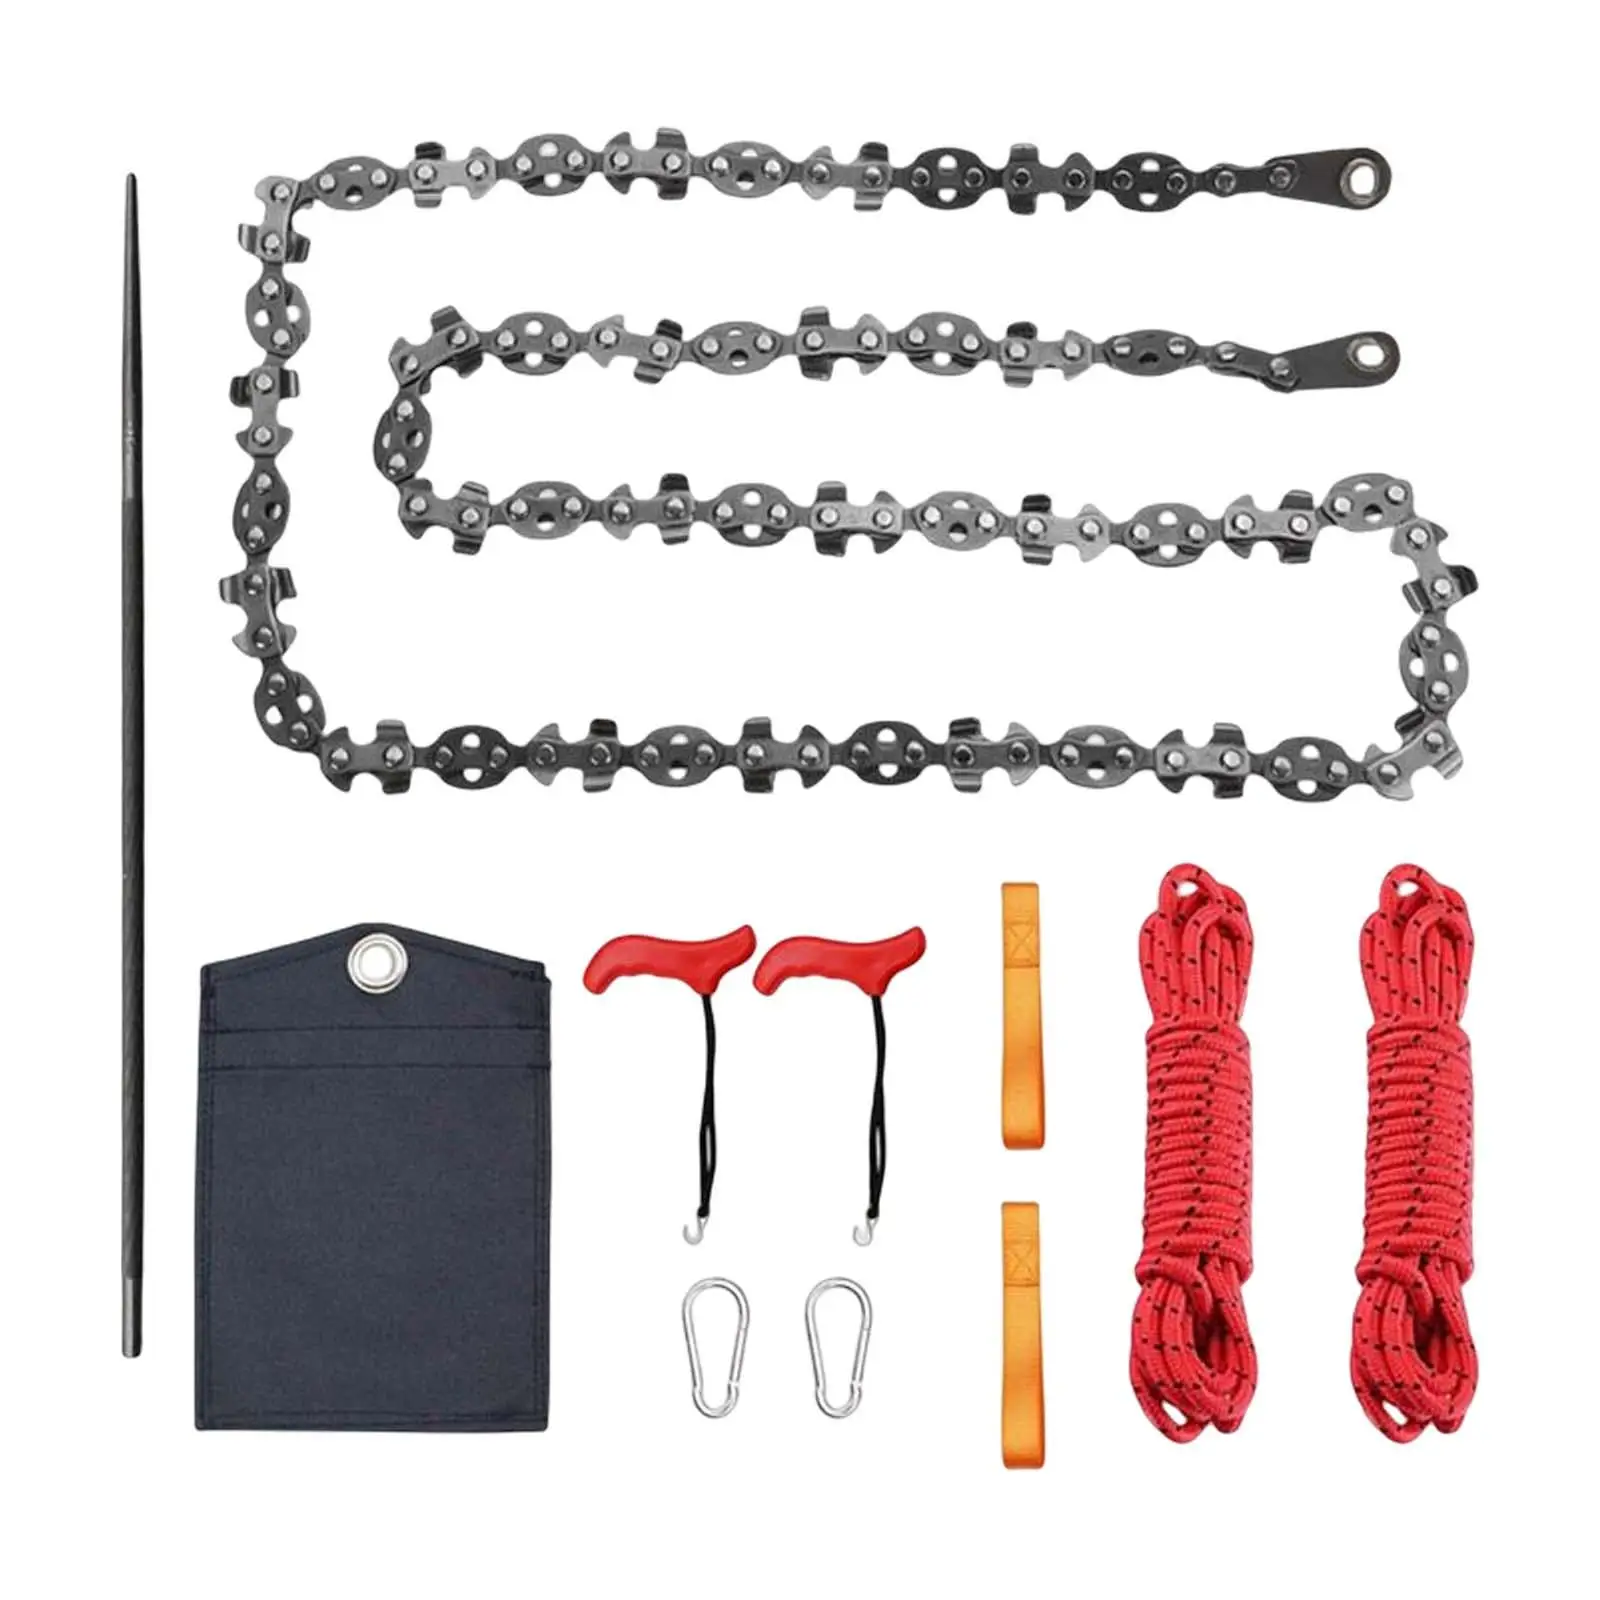 Portable Hand Chain Saw with Storage Bag Zipper Saw Emergency Saw Pocket for Gardening Wood Cutting Outdoor Camping Emergency